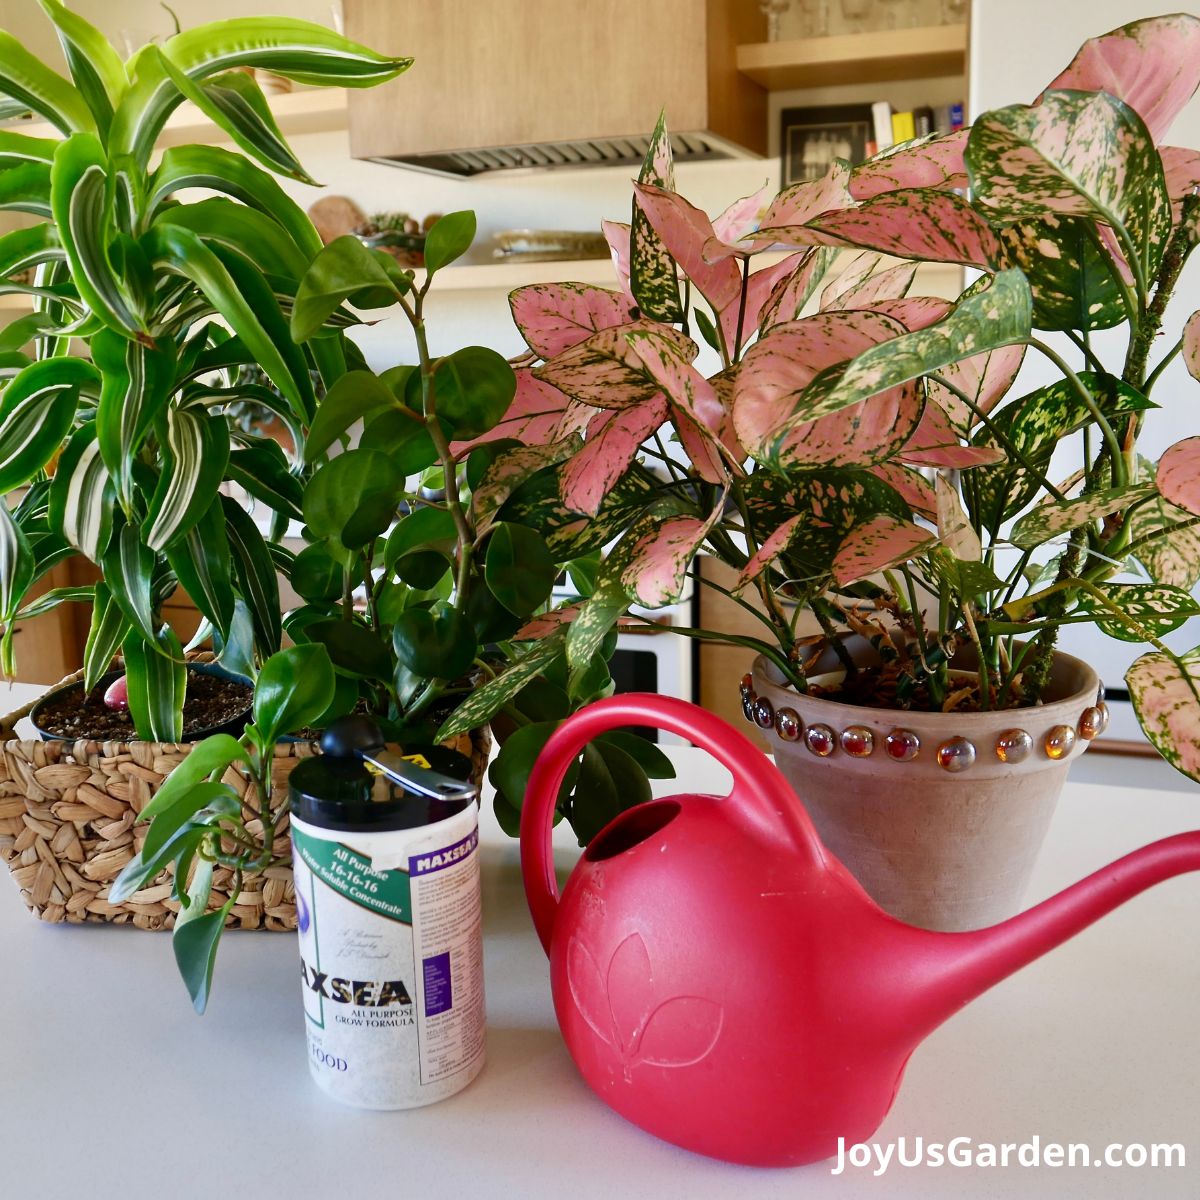 a dracaena lemon surprise, baby rubber plant, & pink agalonema sit on a counter with a red watering can & a jar of fertilizer